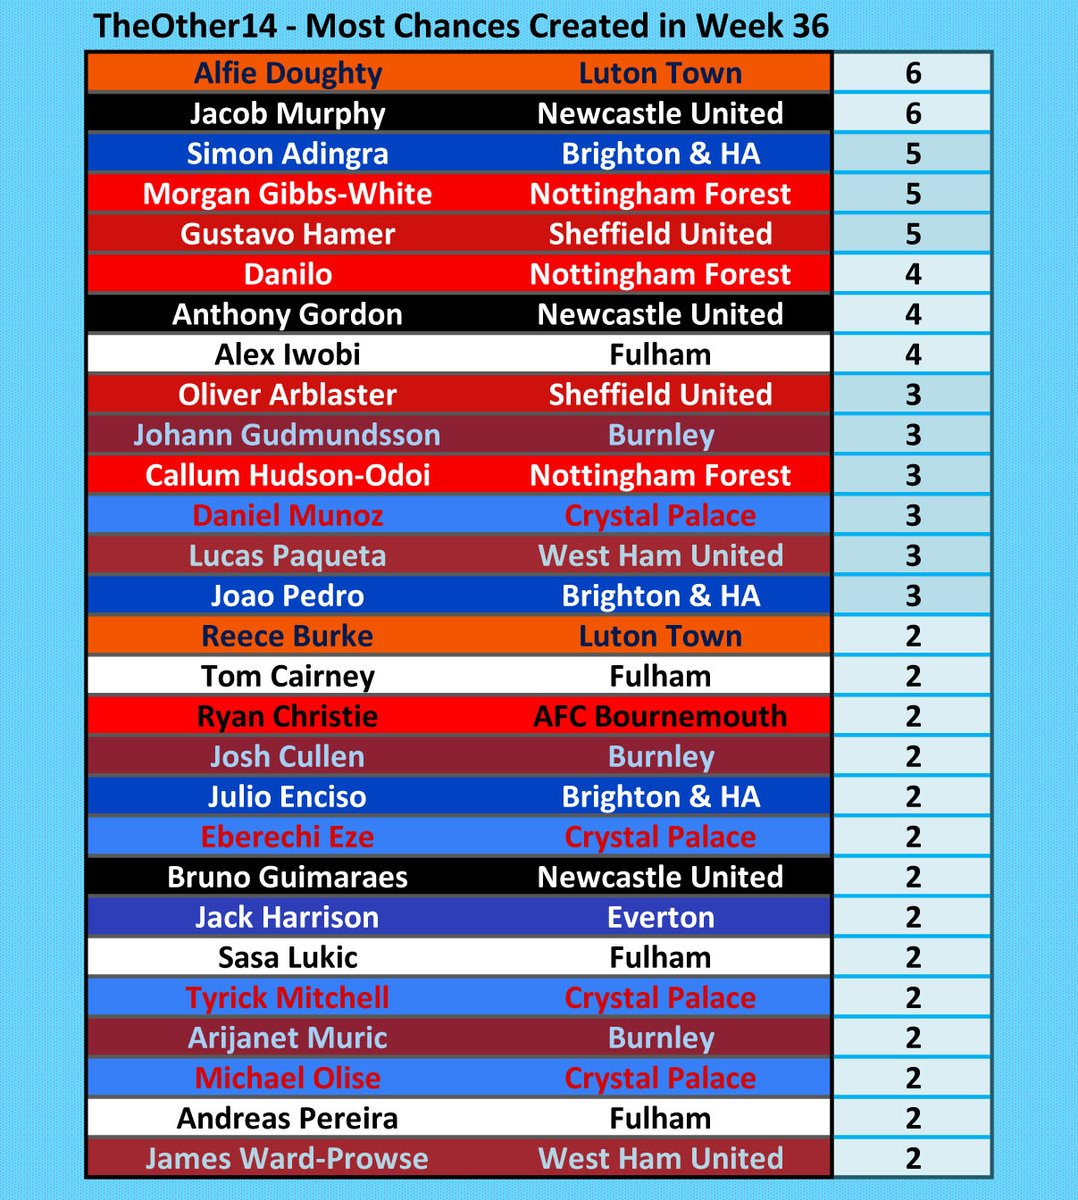 Most Chances Created from TheOther14 in #PL Week 36. @Other14The @alfiedoughty4 and Jacob Murphy with the most. #LTFC #NUFC #BHAFC #NFFC #twitterblades #FFC #twitterclarets #CPFC #WHUFC #AFCB #EFC